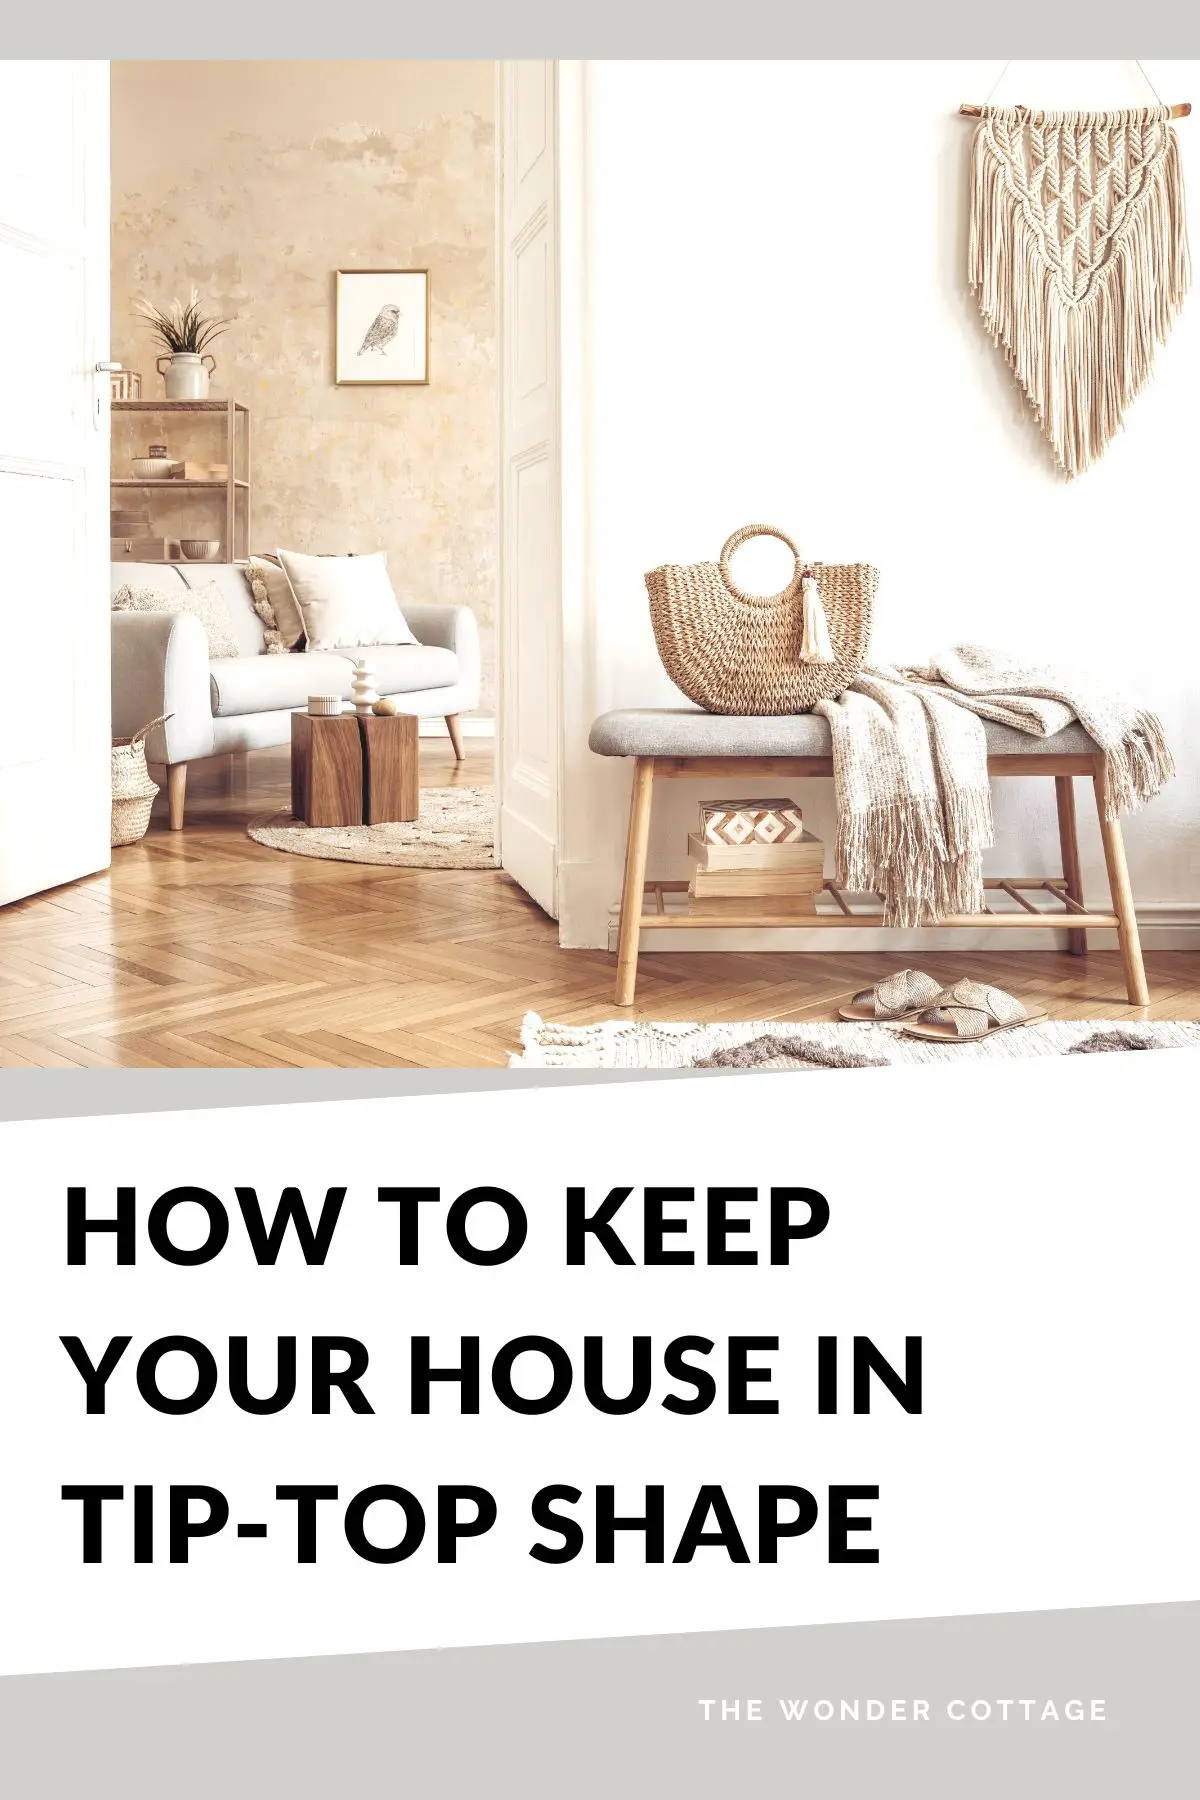 How To Keep Your House In Tip-Top Shape - A Quick Checklist